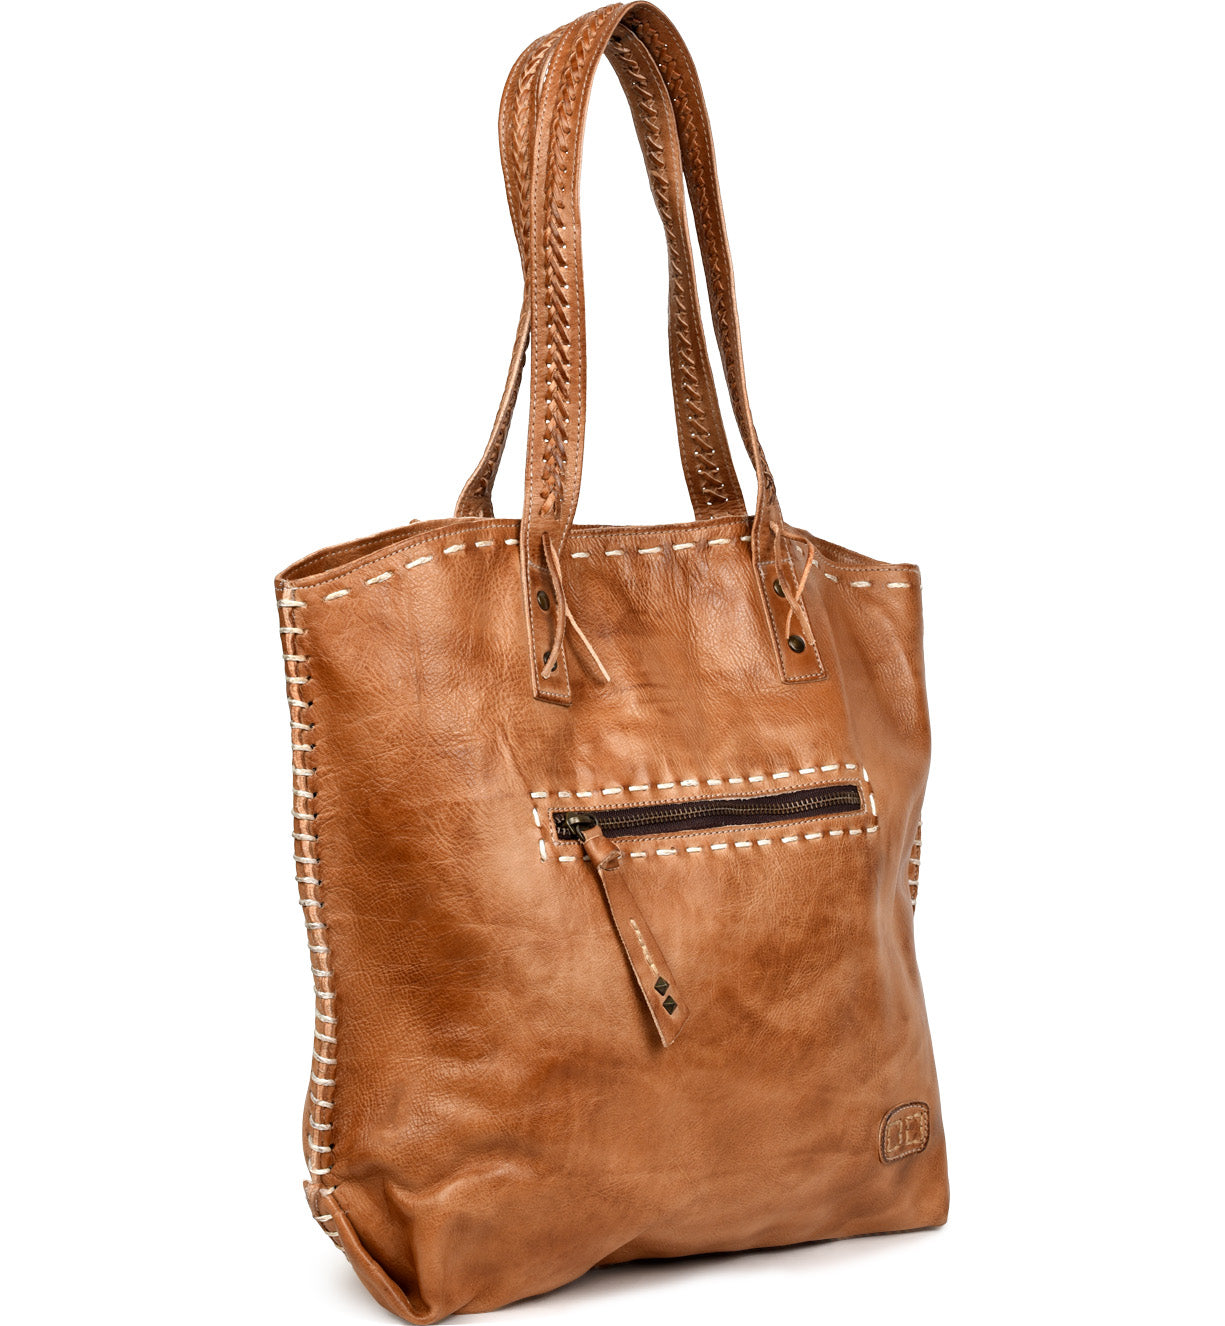 A Barra tan leather tote bag by Bed Stu.